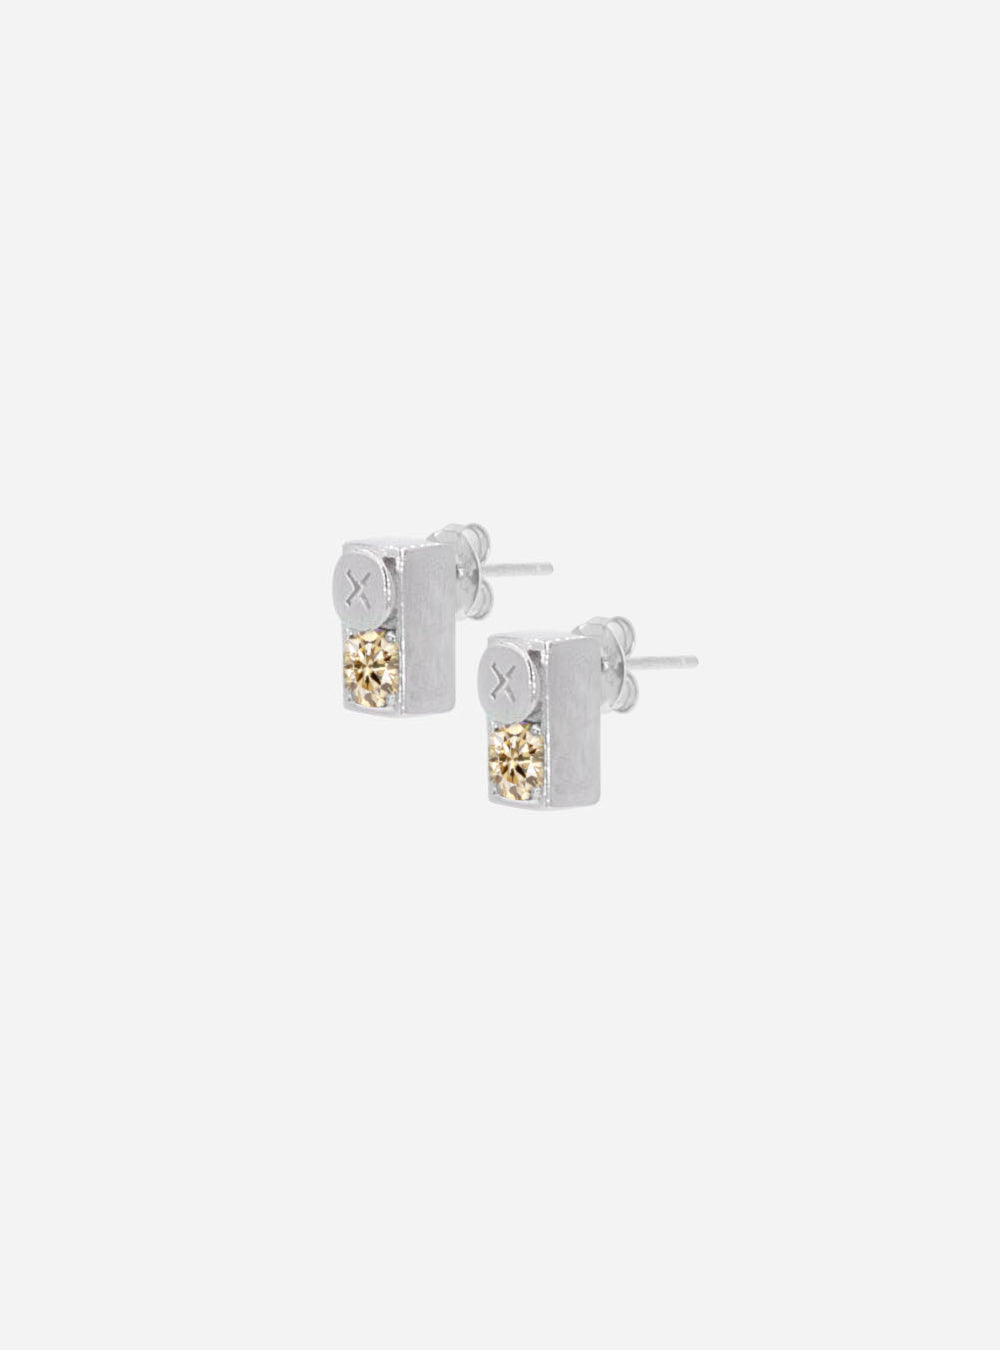 A pair of MIDNIGHTFACTORY silver and gold Screwbox earrings on a white background.